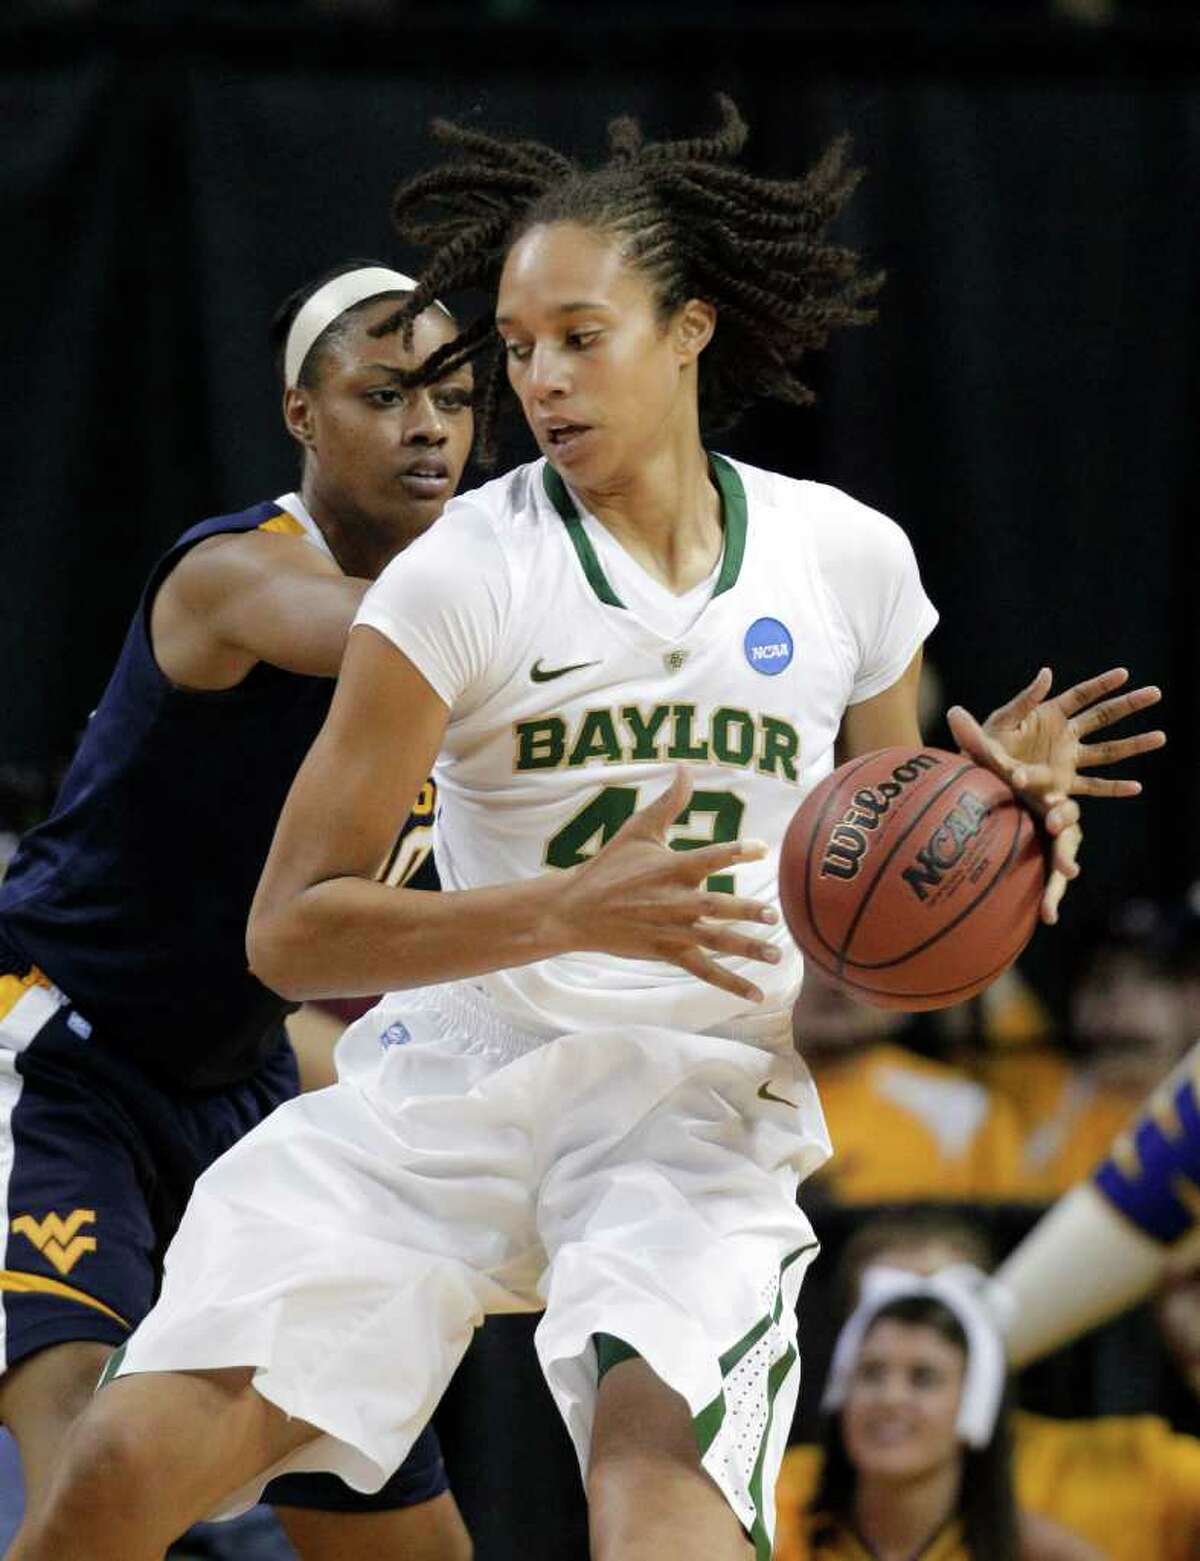 Baylor center Brittney Griner (42) looks for an opening against West Virginia center Asya Bussie, left, in the first half of a second-round game of the NCAA women's college basketball tournament Tuesday, March 22, 2011, in Waco, Texas.